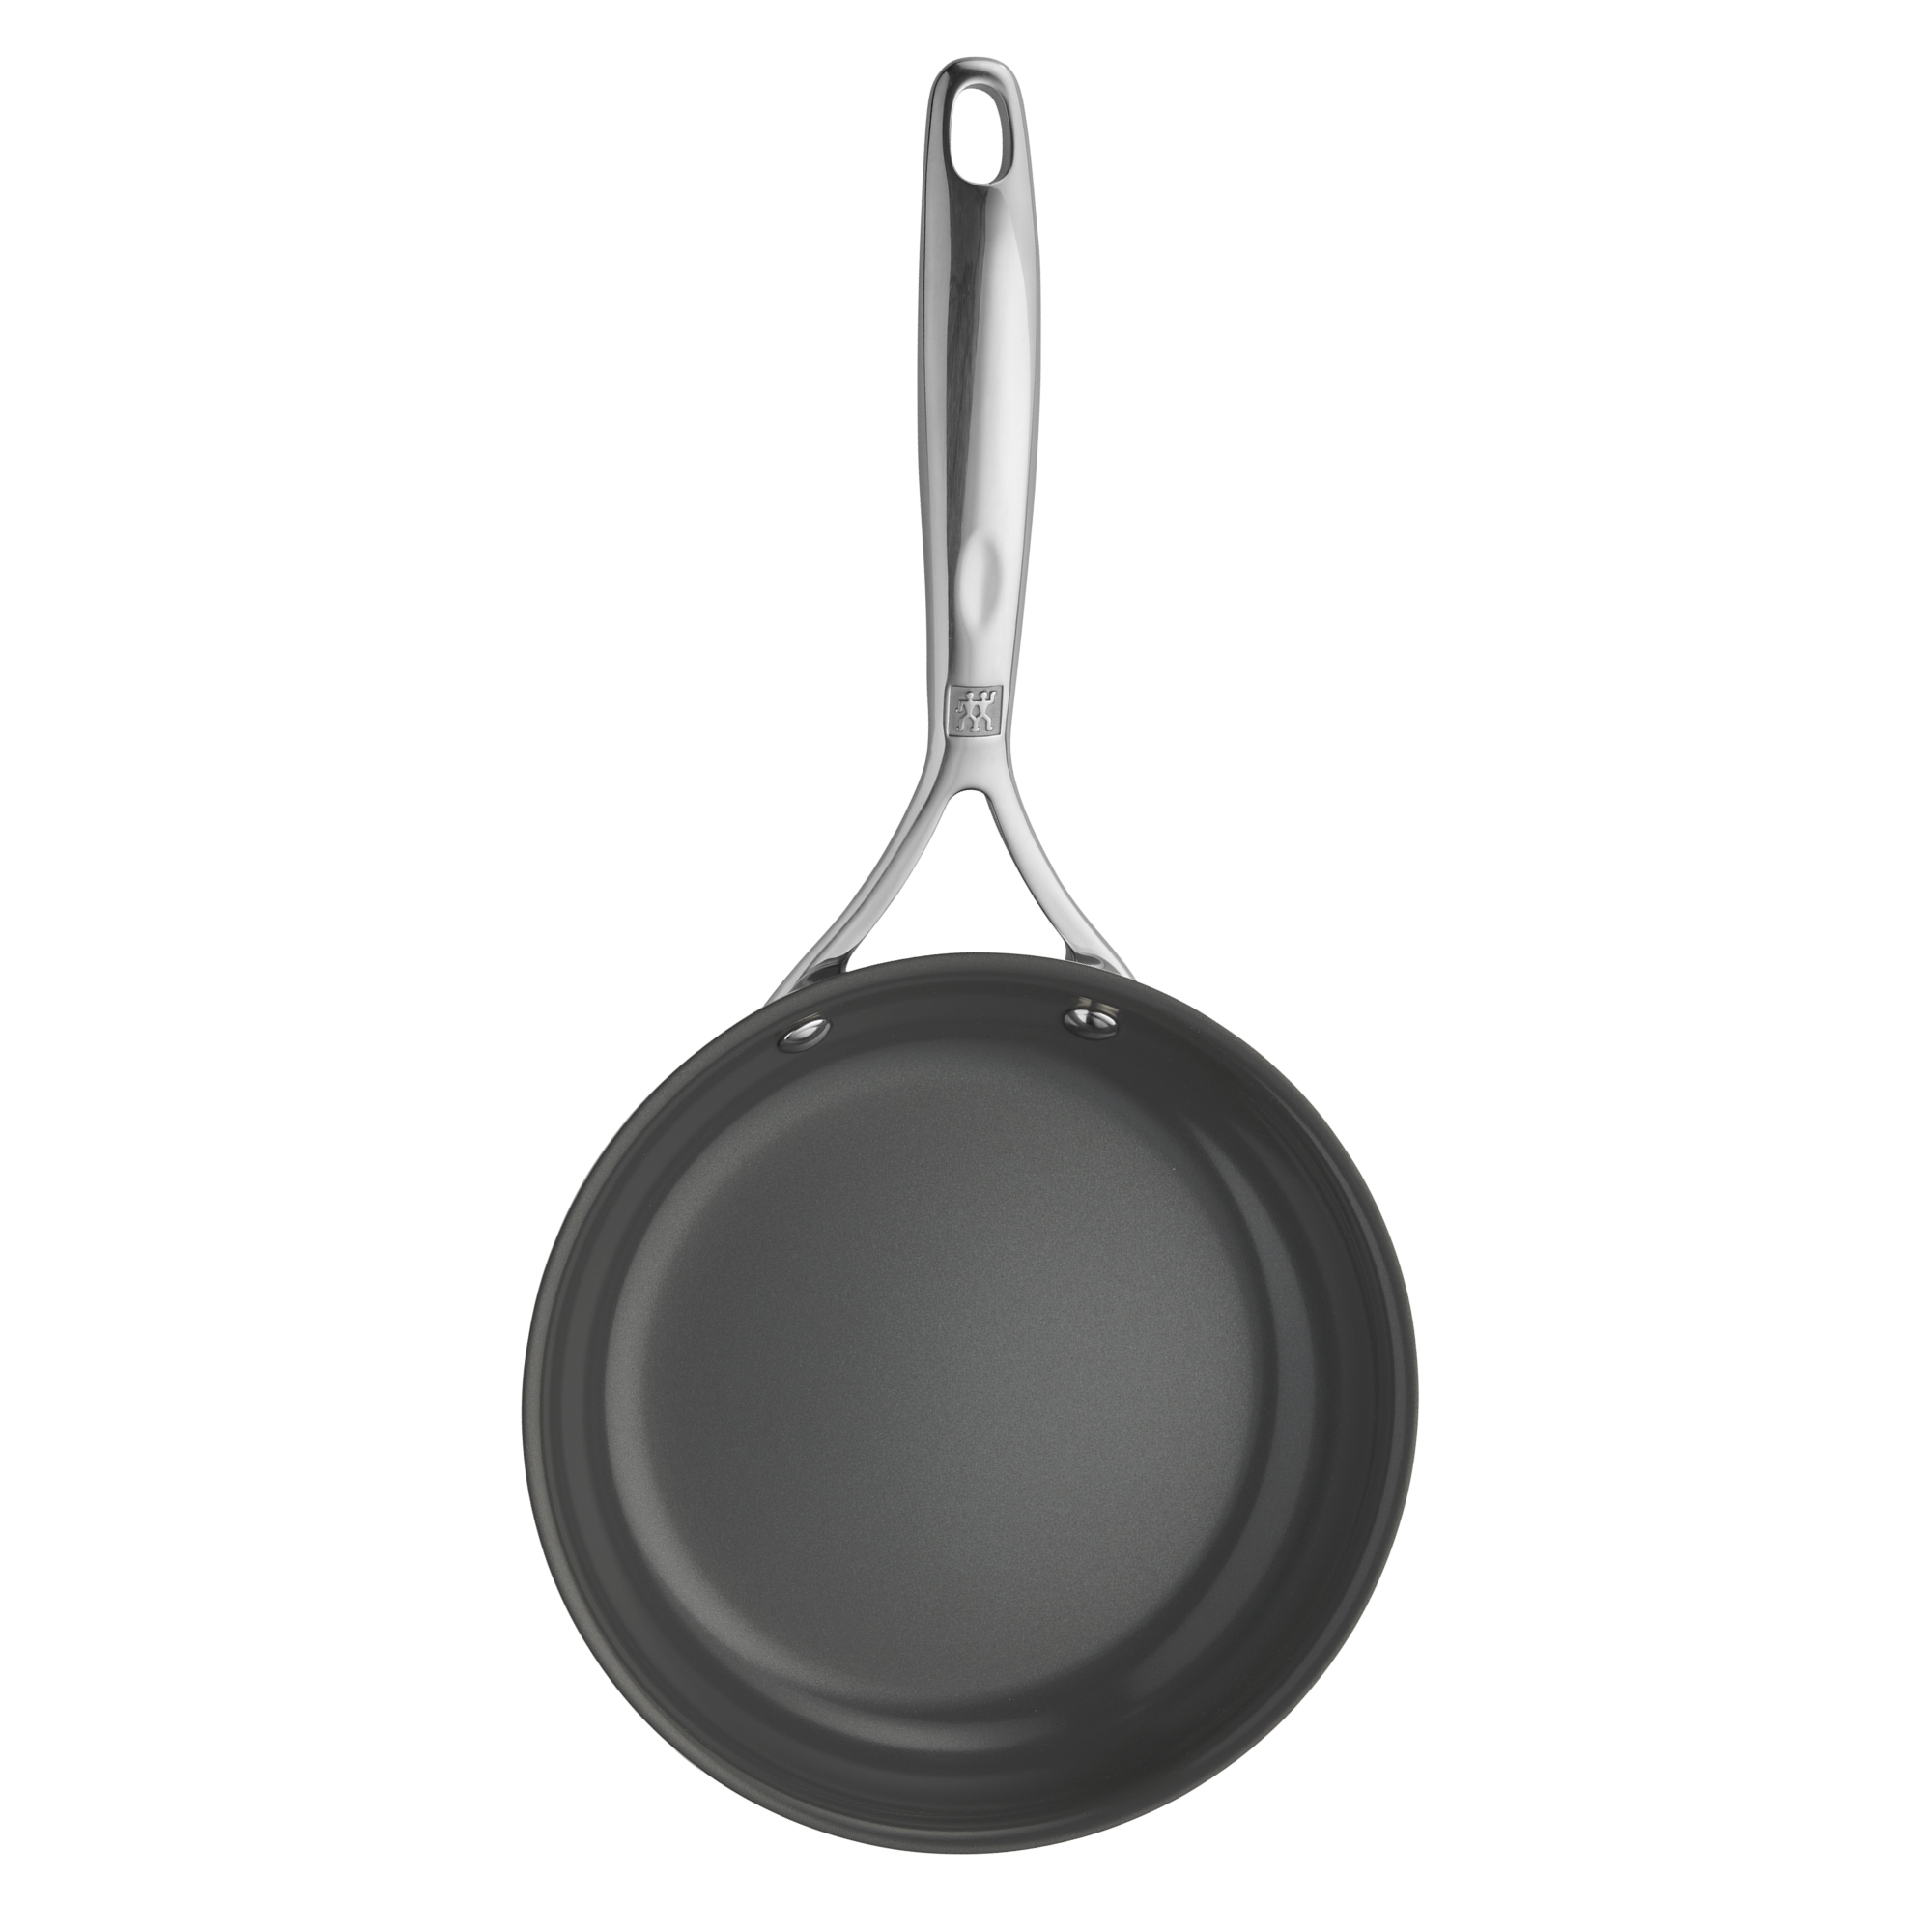 Zwilling Energy Plus 10-Inch Stainless Steel Ceramic Nonstick Fry Pan with Lid